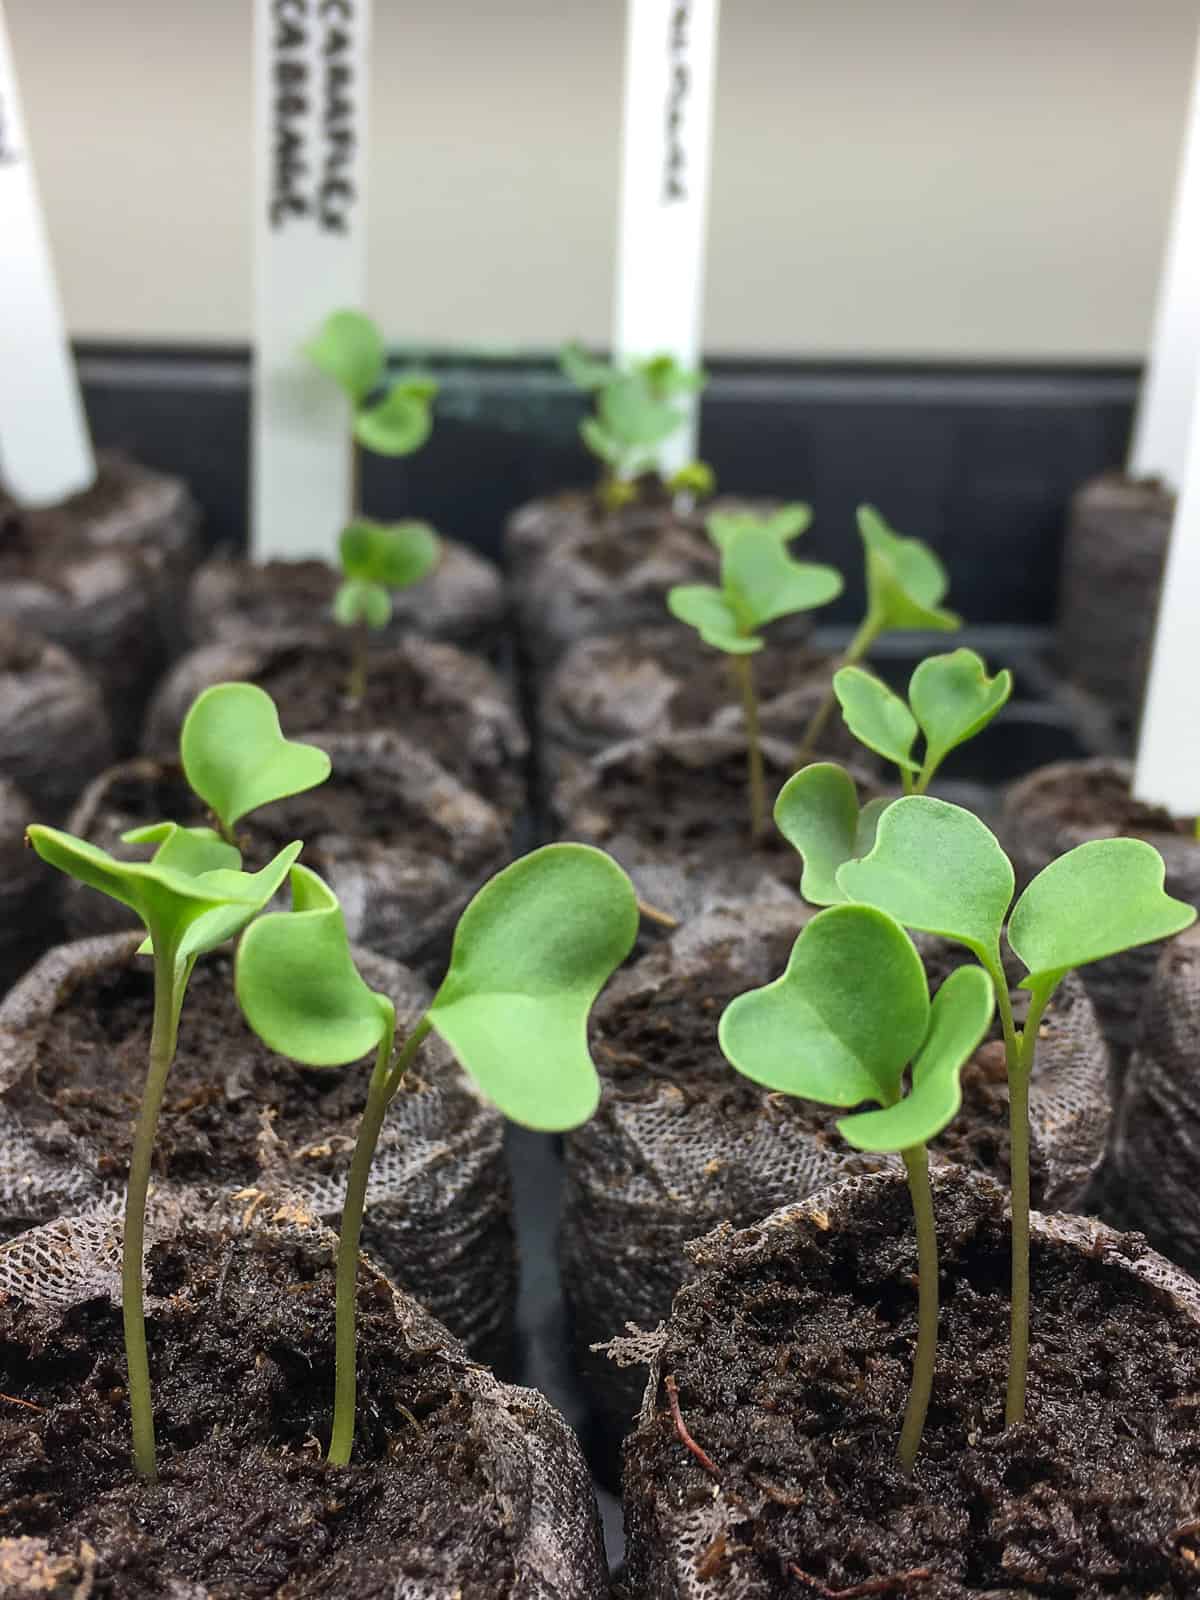 Some small green seedlings growing under a grow light indoors.